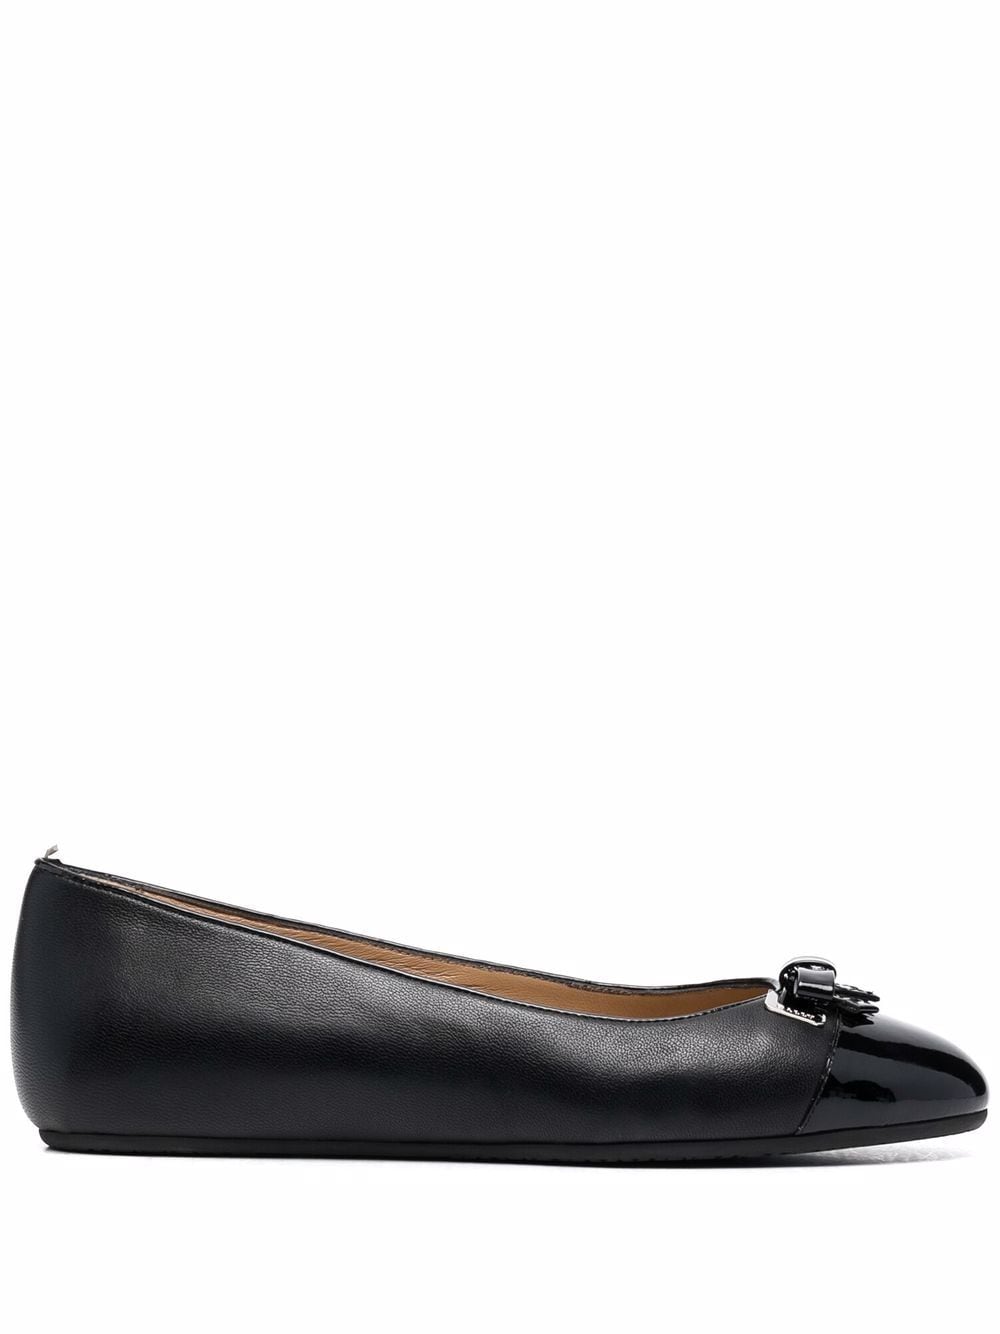 Bally bow-detail Leather Ballerina Shoes - Farfetch